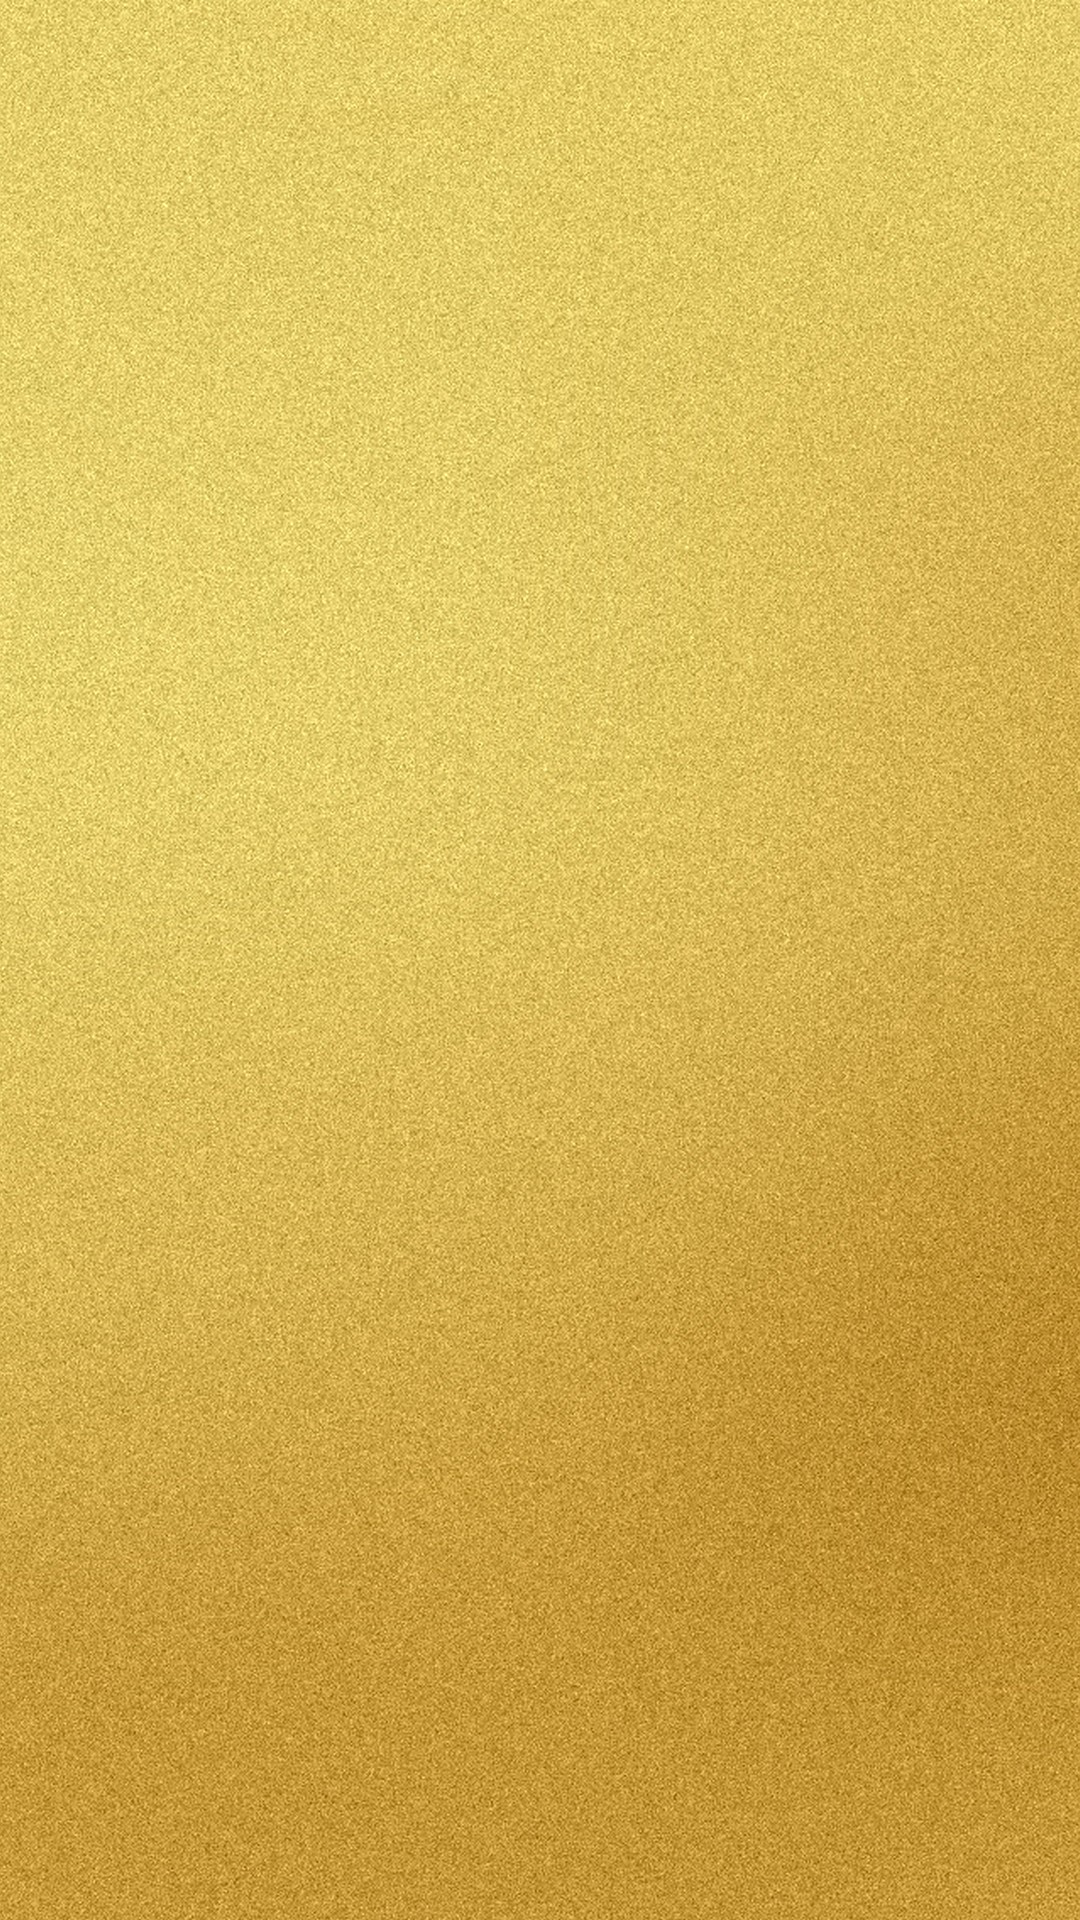 Plain Gold iPhone Wallpaper with HD Resolution 1080X1920